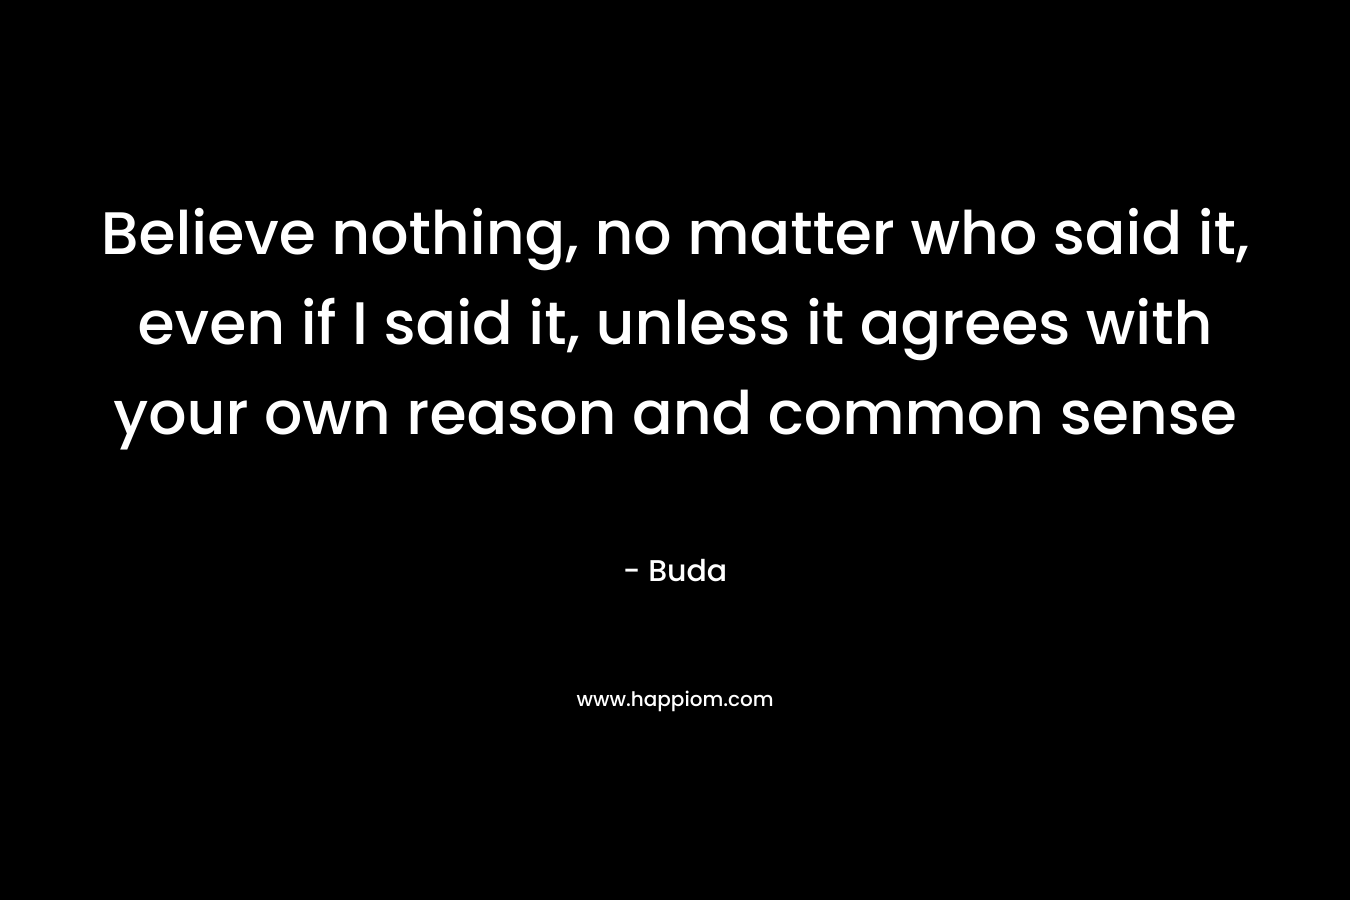 Believe nothing, no matter who said it, even if I said it, unless it agrees with your own reason and common sense